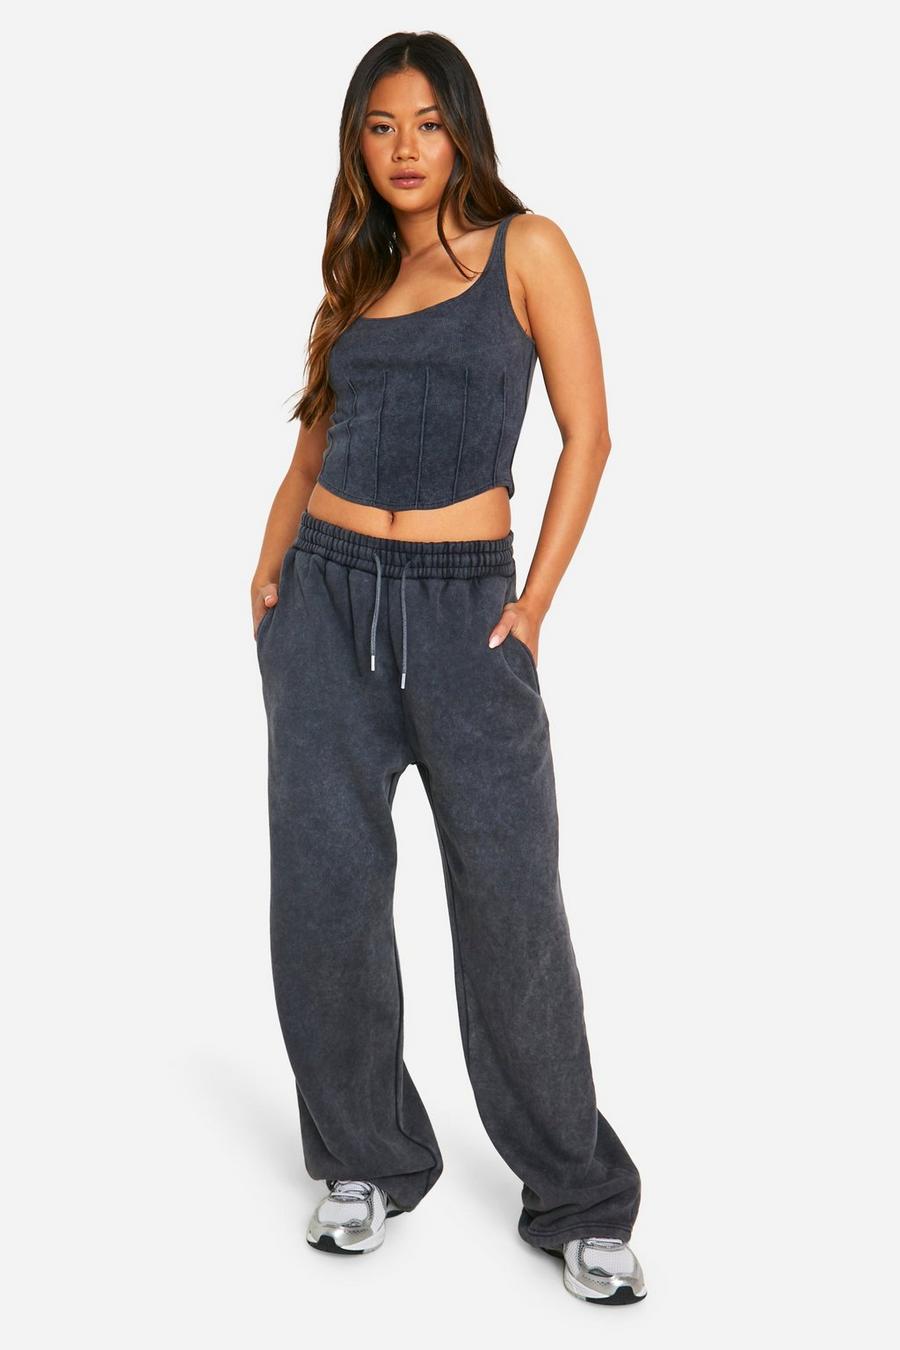 Charcoal Washed Seam Detail Corset Top And Straight Leg Sweatpant Set